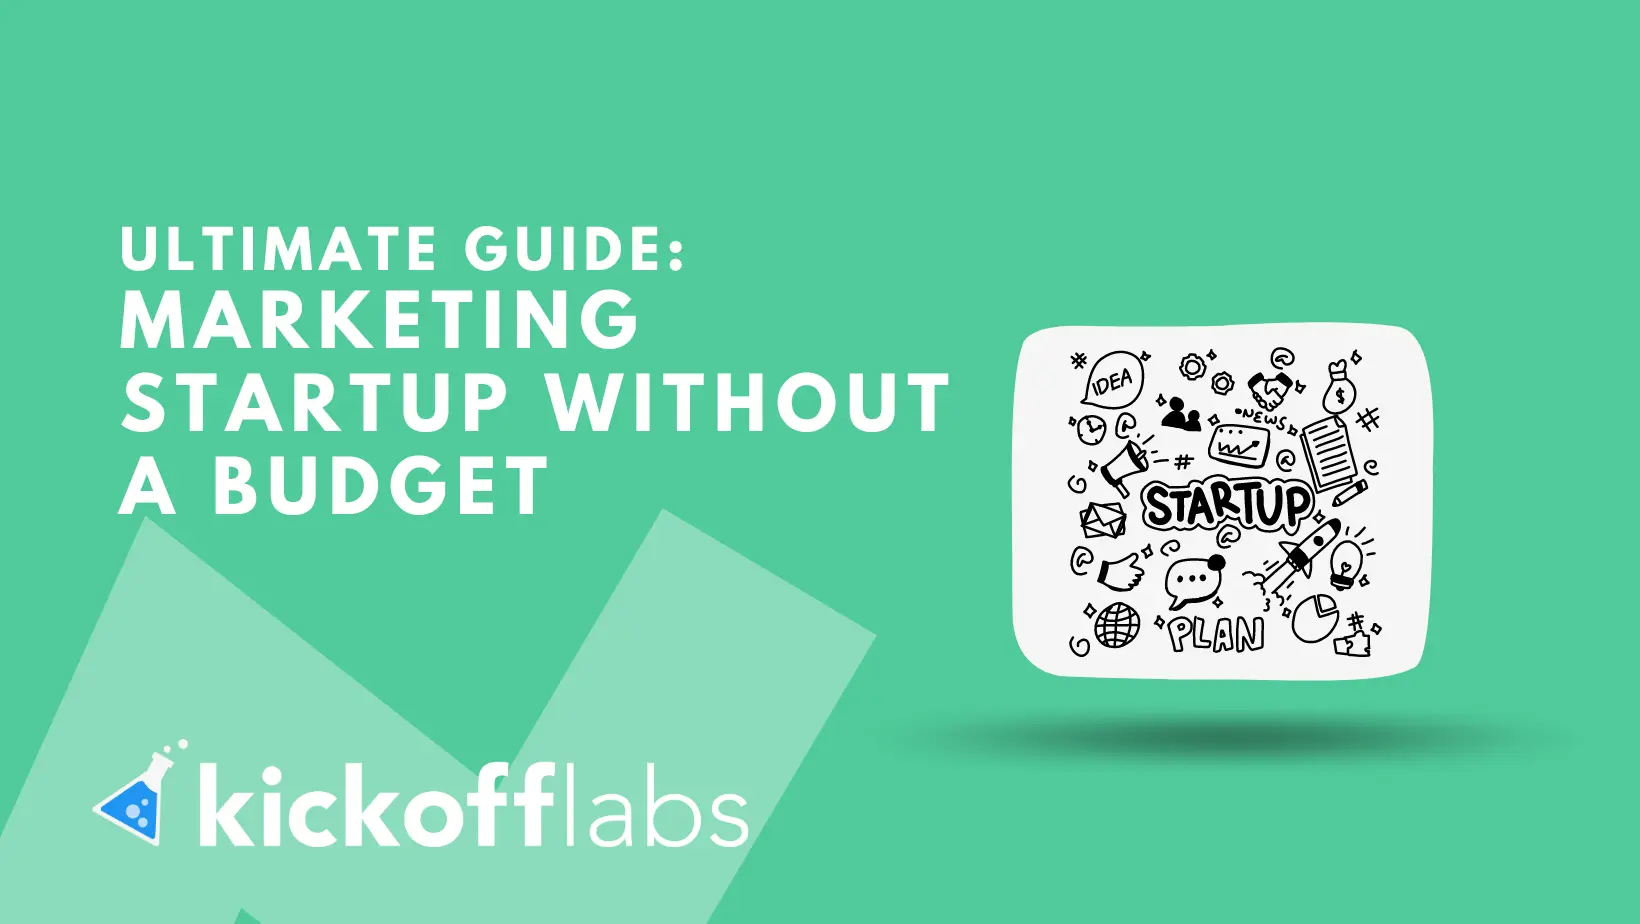 The Ultimate Guide to Marketing Your Startup Online Without a Big Budget